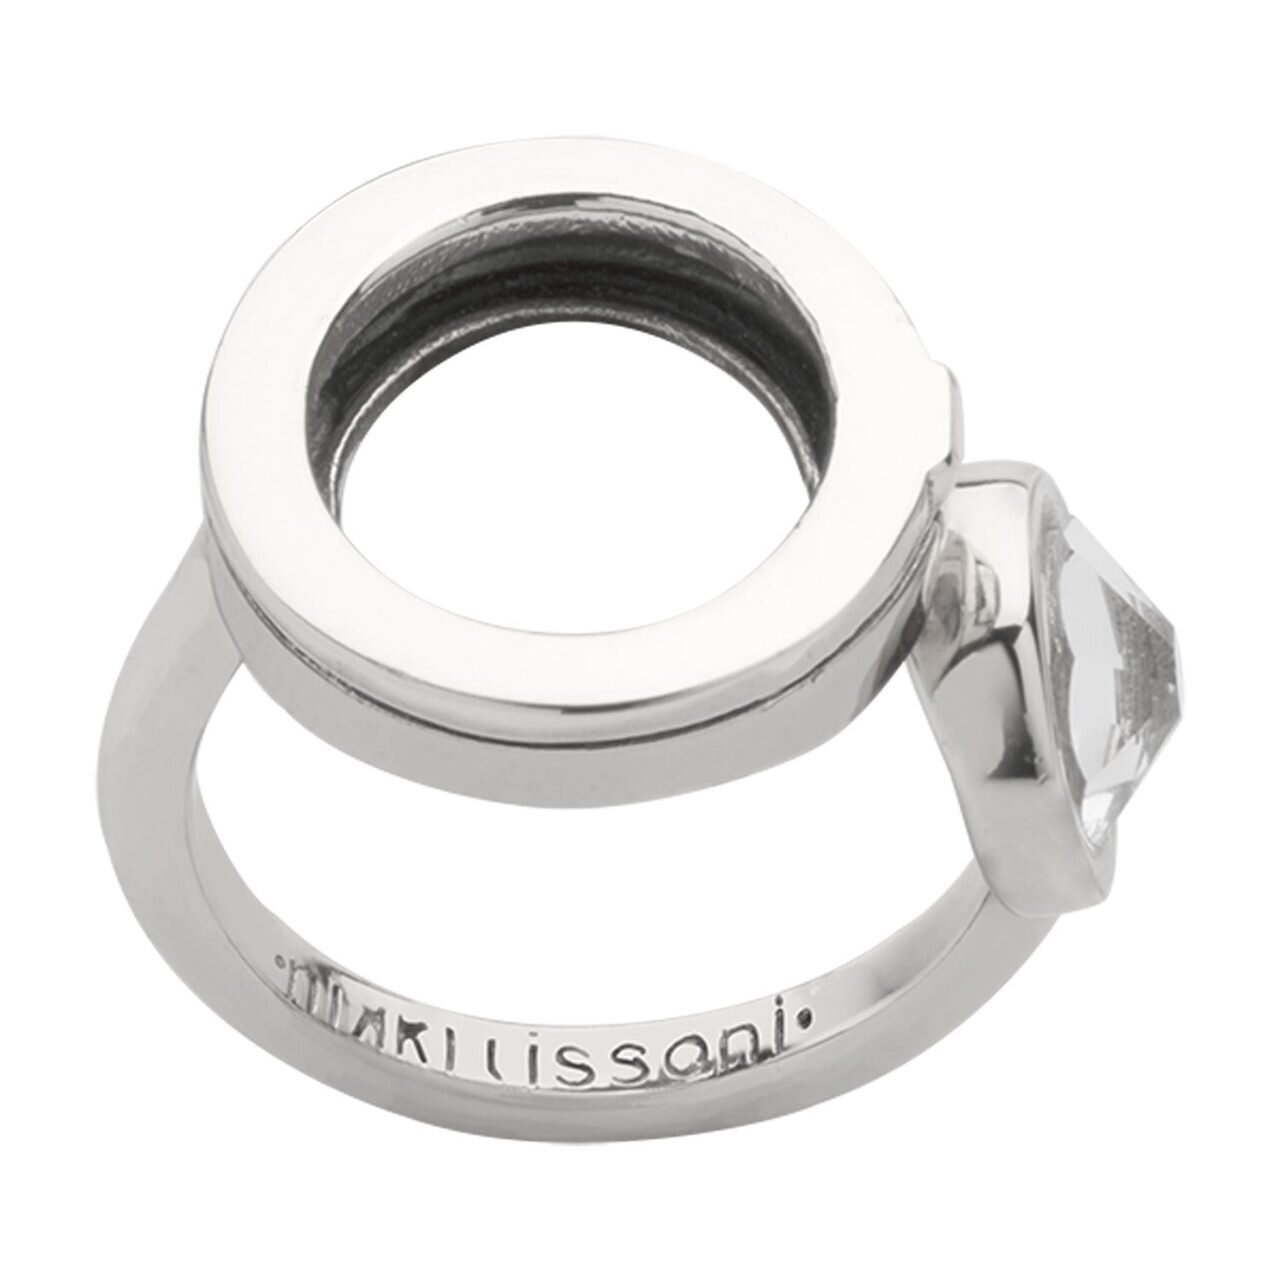 Nikki Lissoni Interchangeable Open Ring with Swarovski Stone Silver-plated Size 7 R1007S7